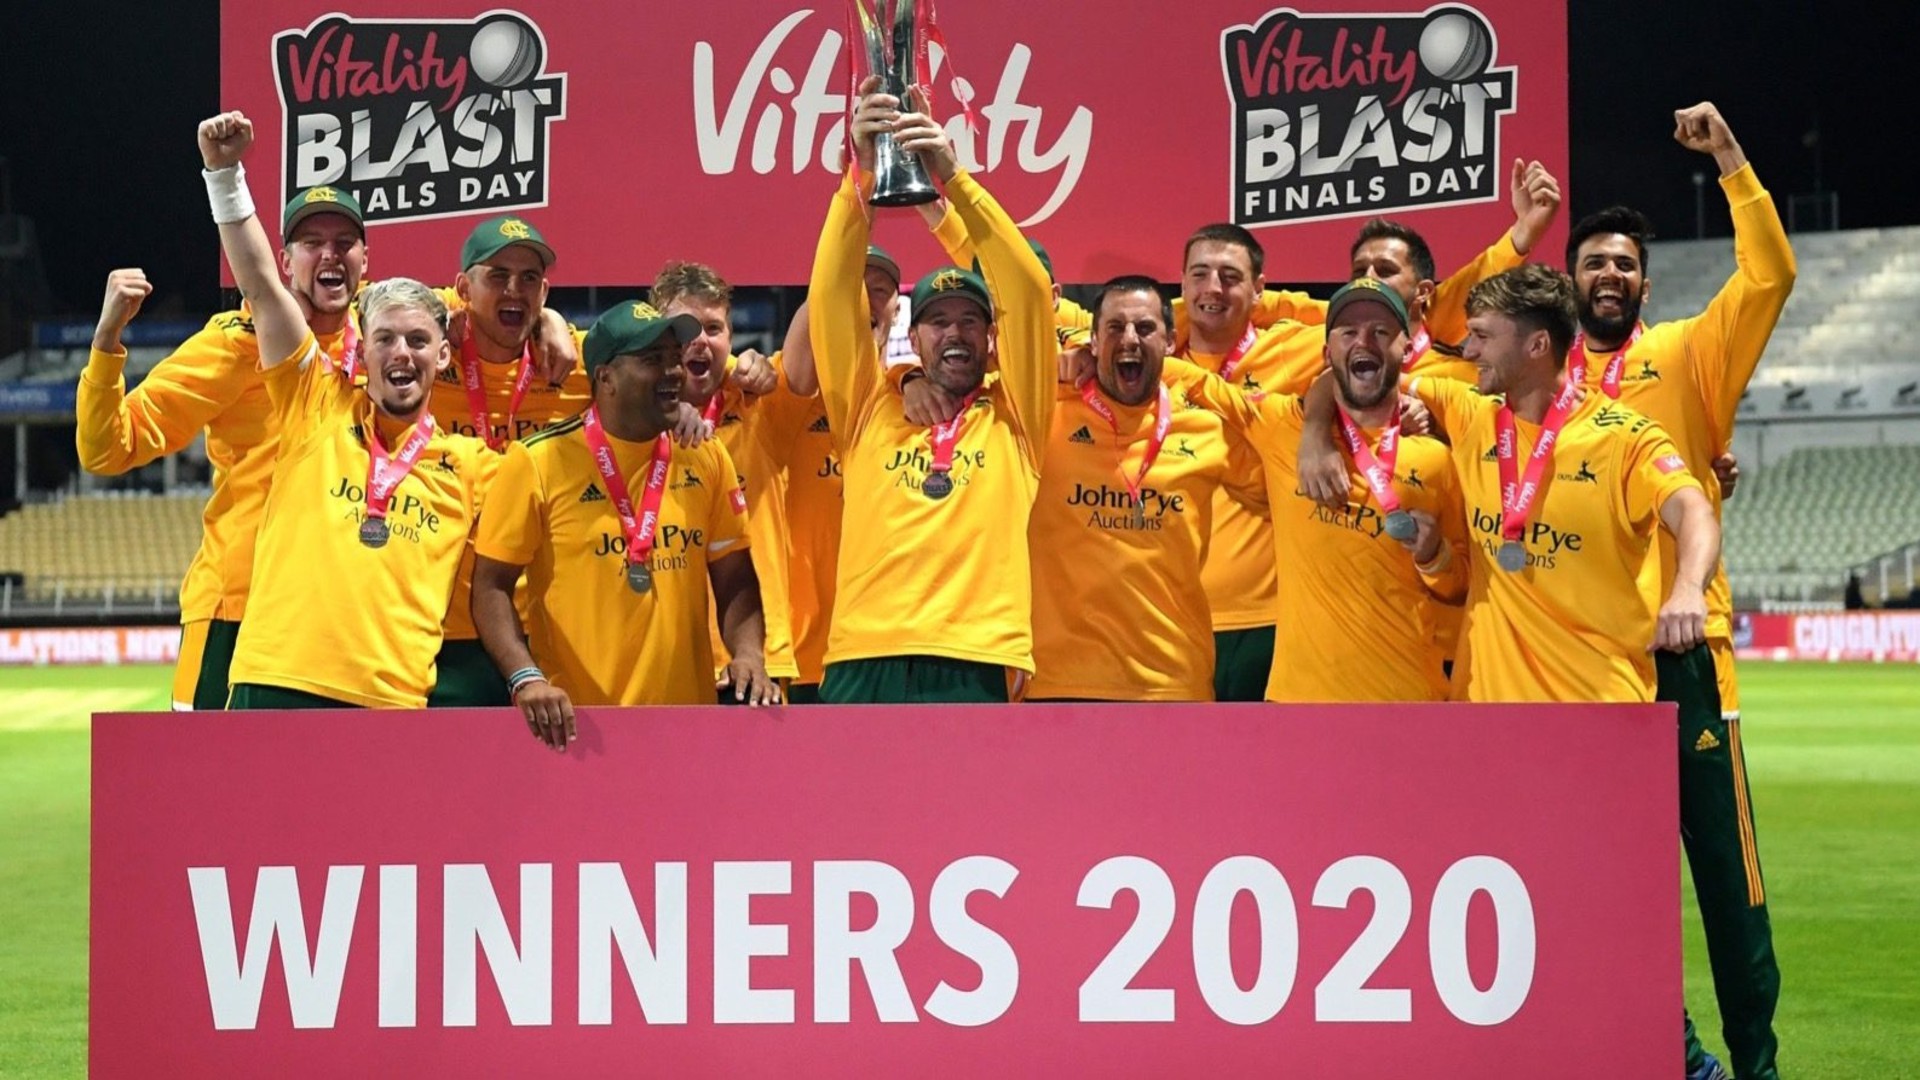 Vitality Blast 2021 Full schedule, live streaming, when and where to watch